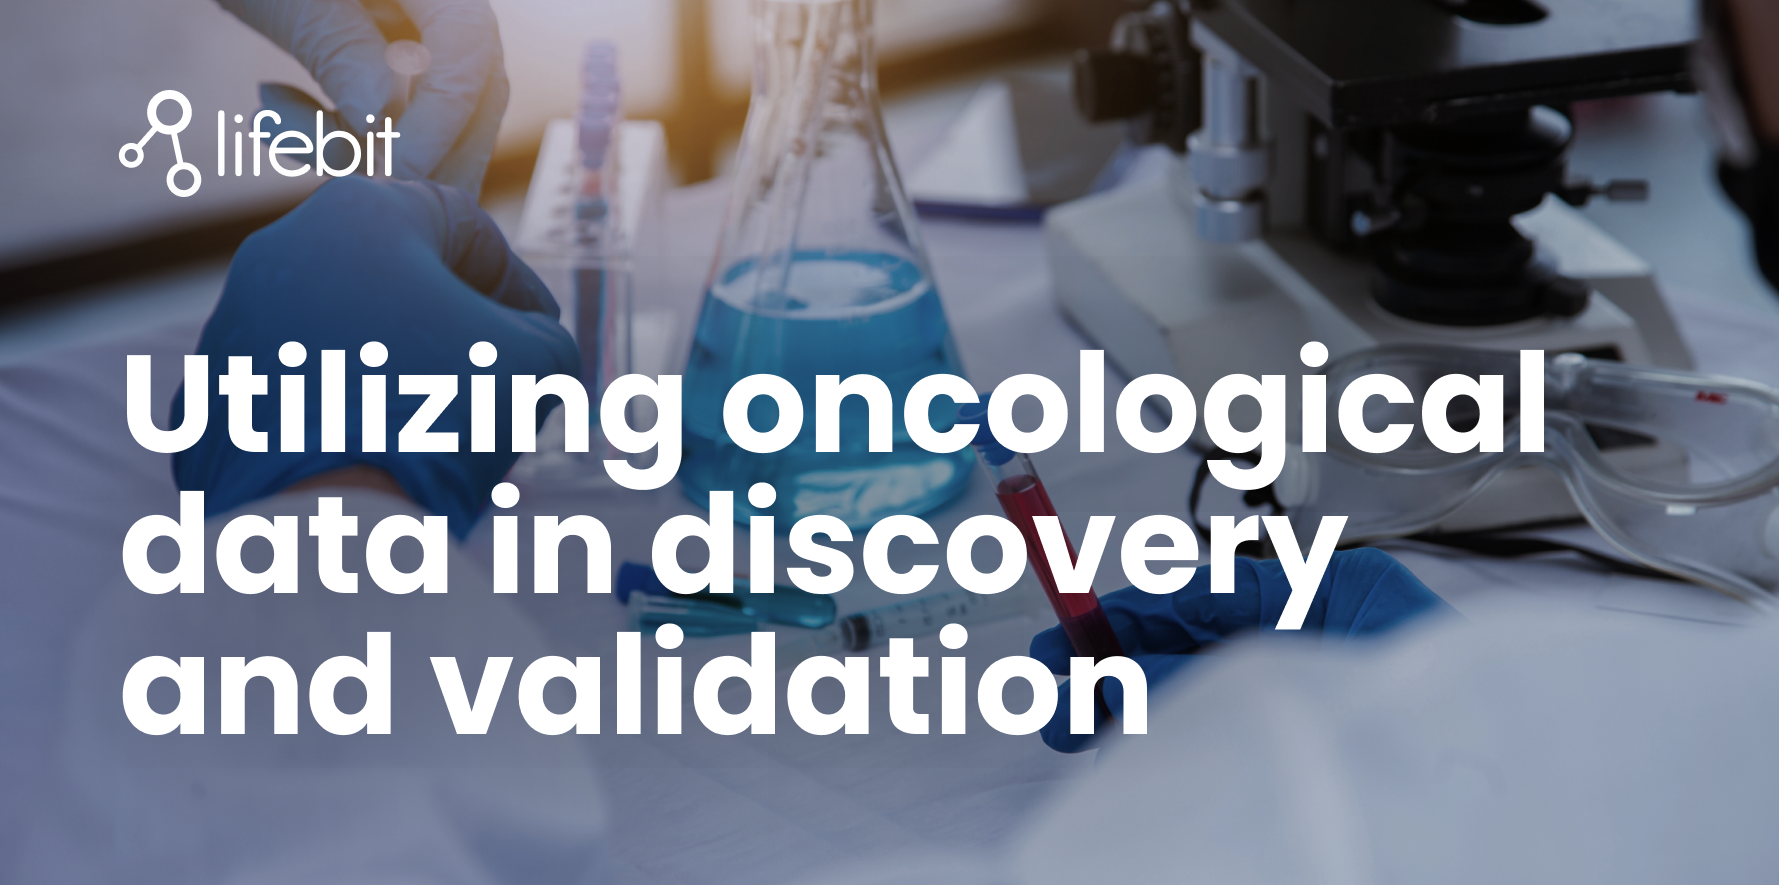 Utilizing oncological data in discovery and validation